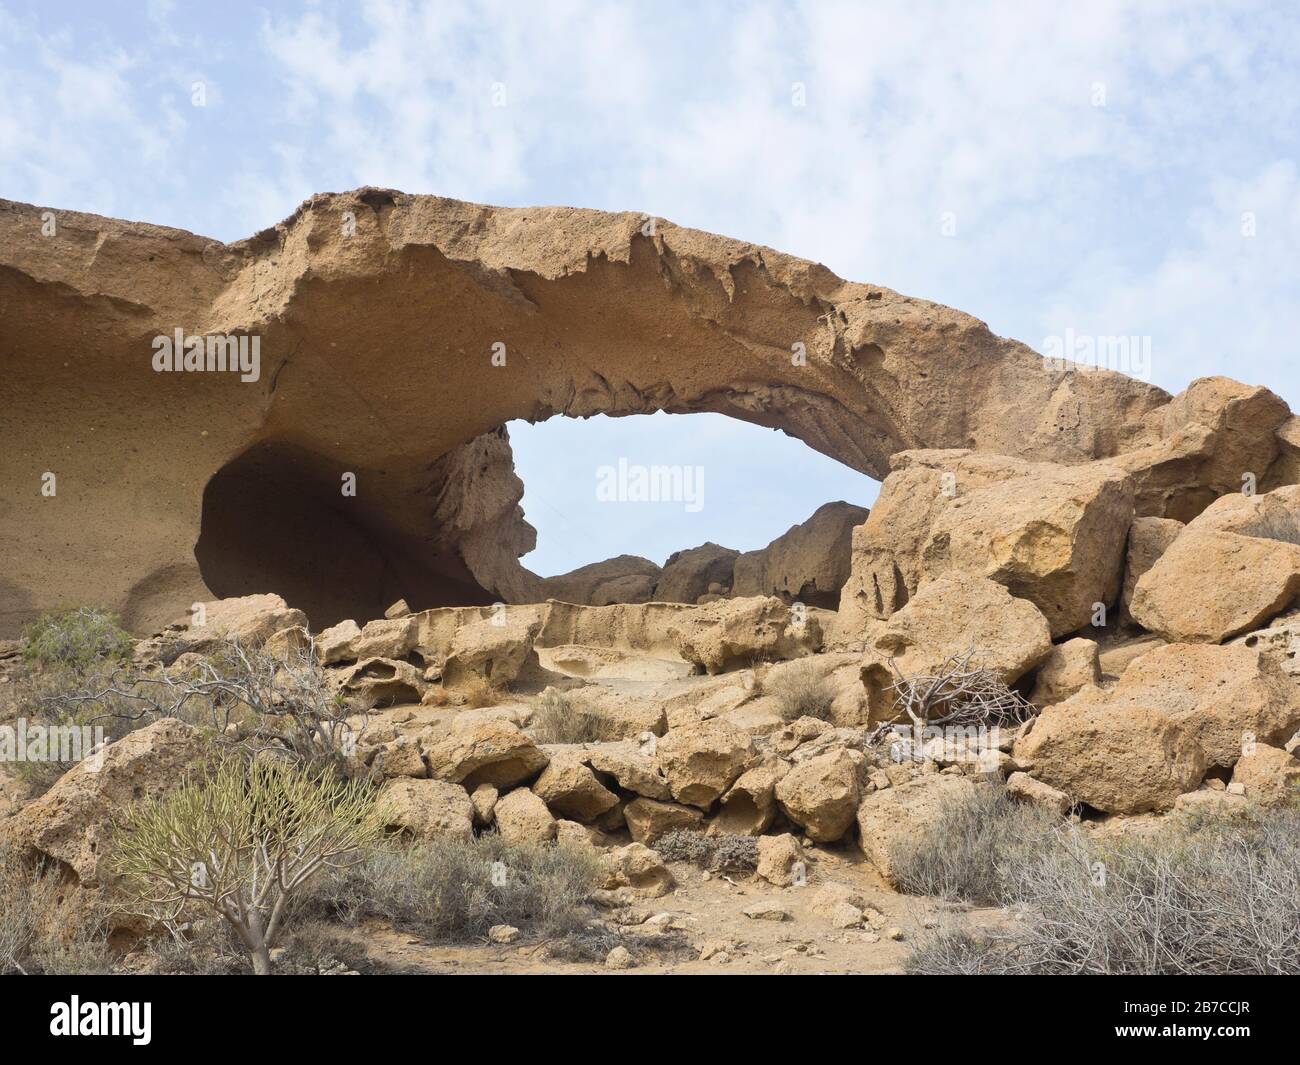 Volcanic rock and erosion created this natural arch and other bizarre rock formations in Tajao, Tenerife, Canary islands Spain Stock Photo